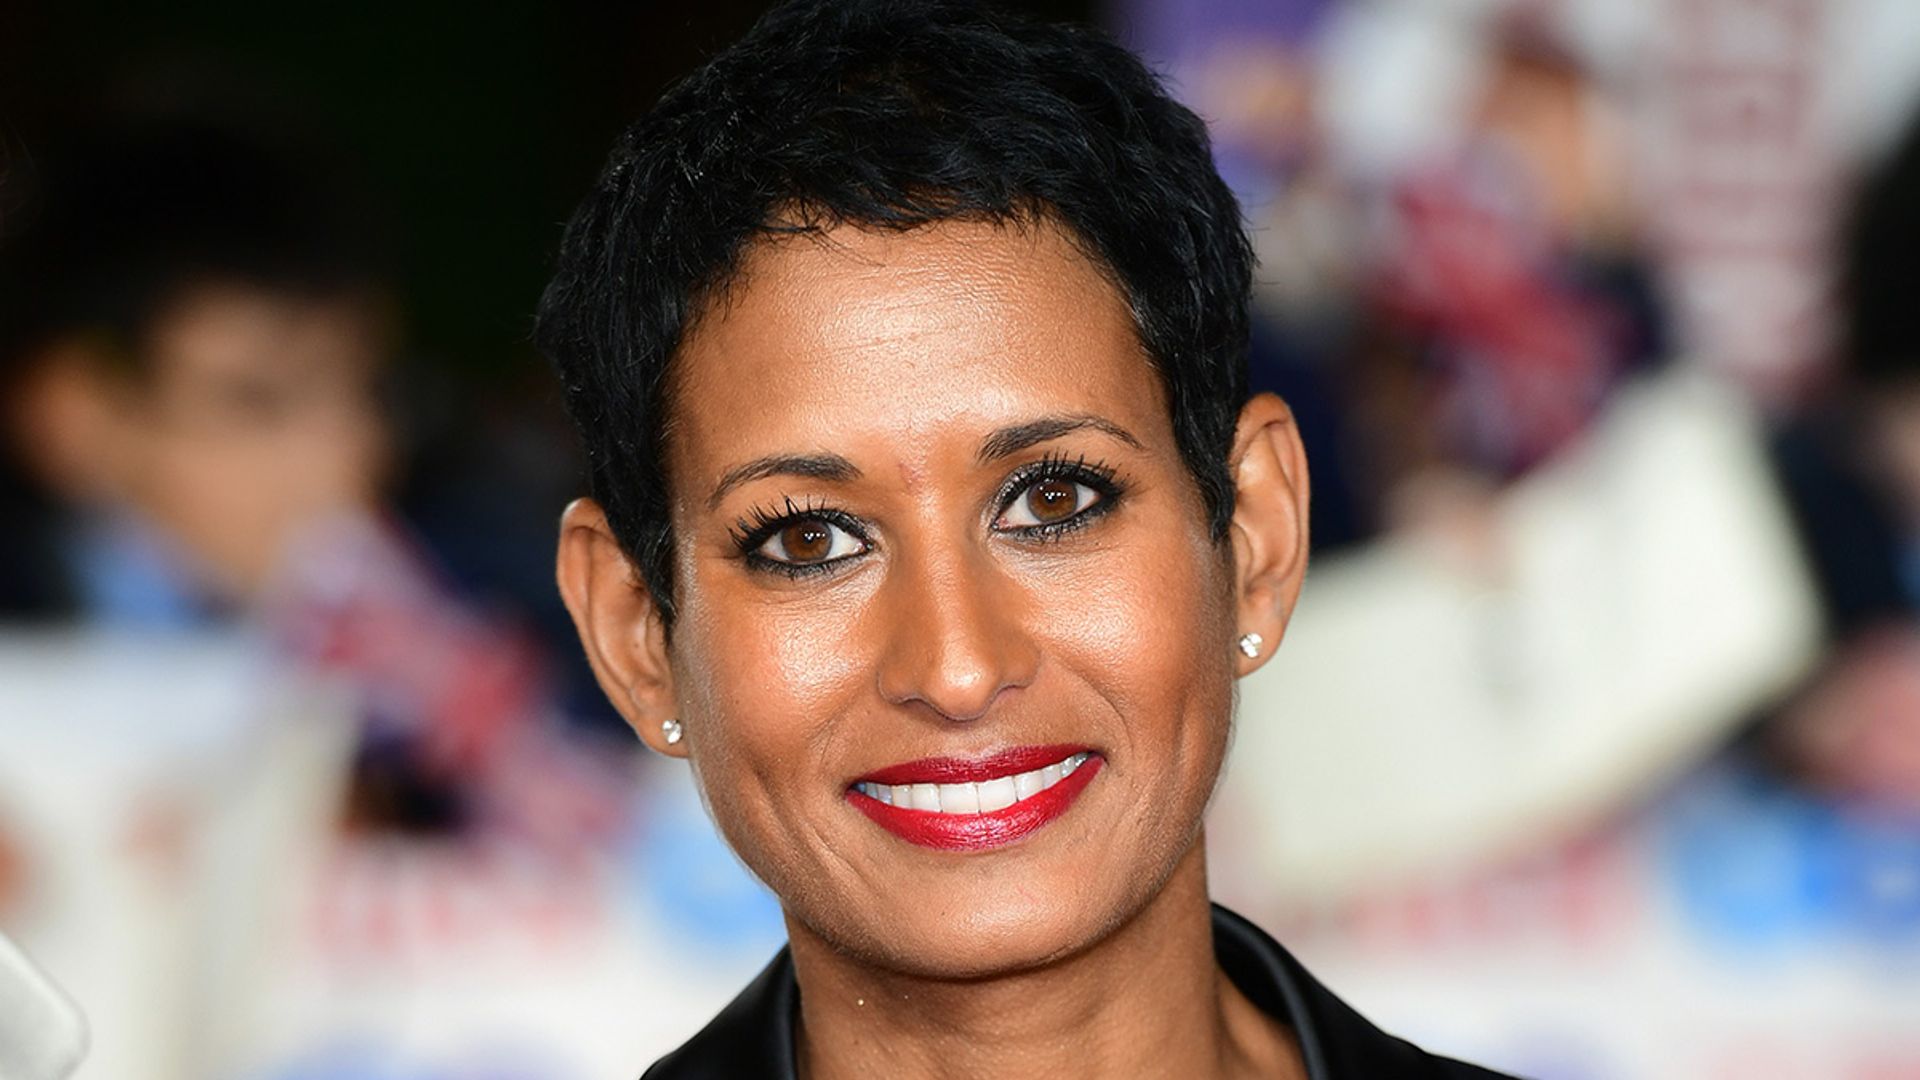 60 Top Naga Munchetty Pictures, Photos and Images - Getty 